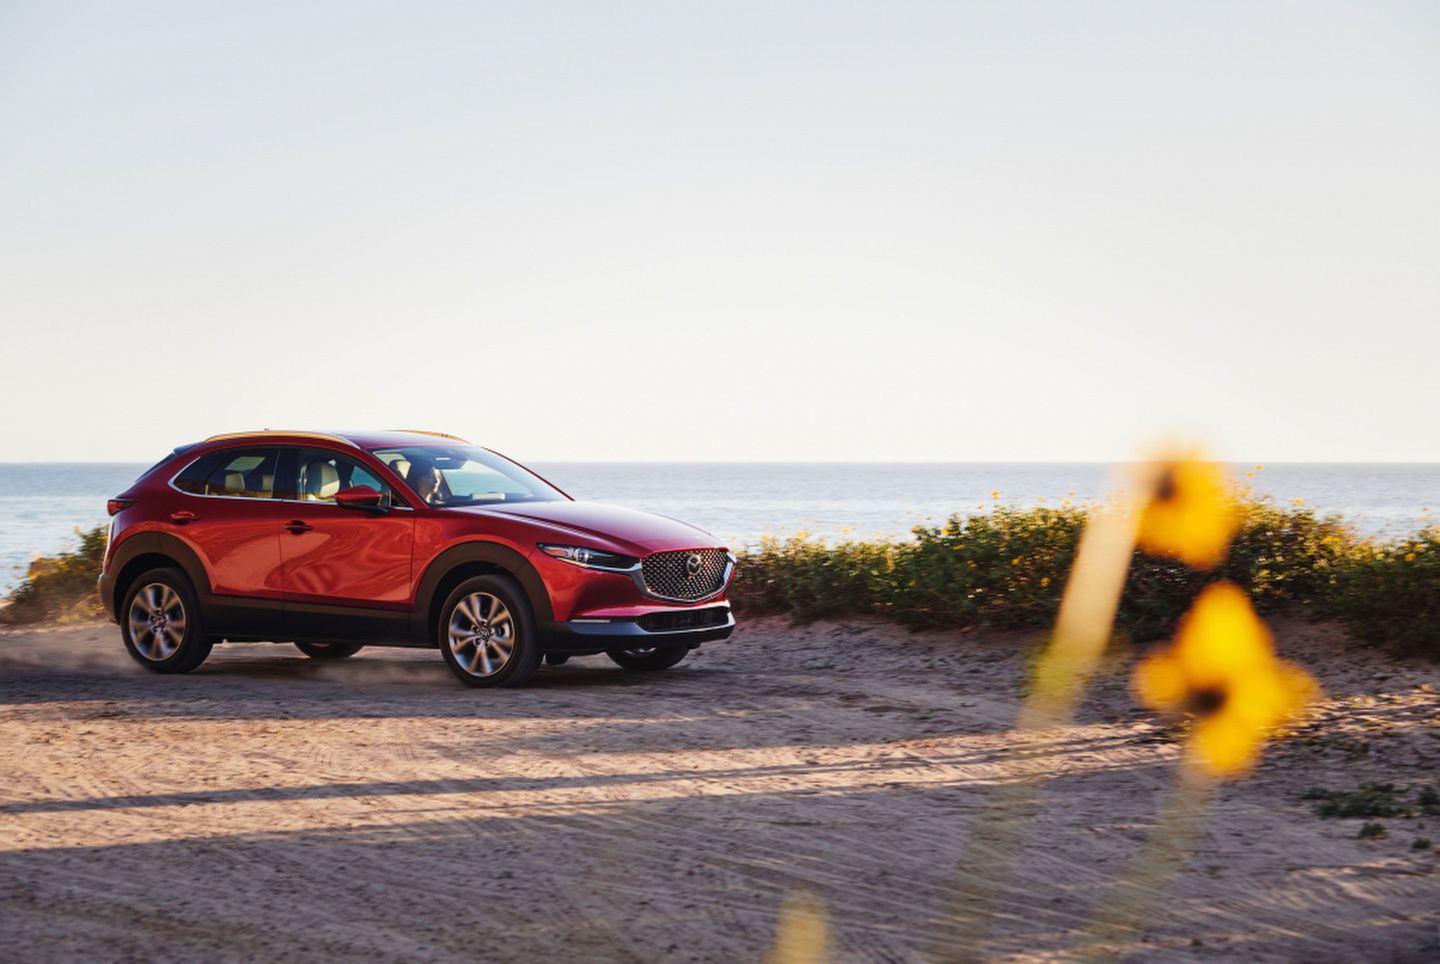 2022 Mazda sport utility vehicle lineup pricing, fuel economy, and towing capability information